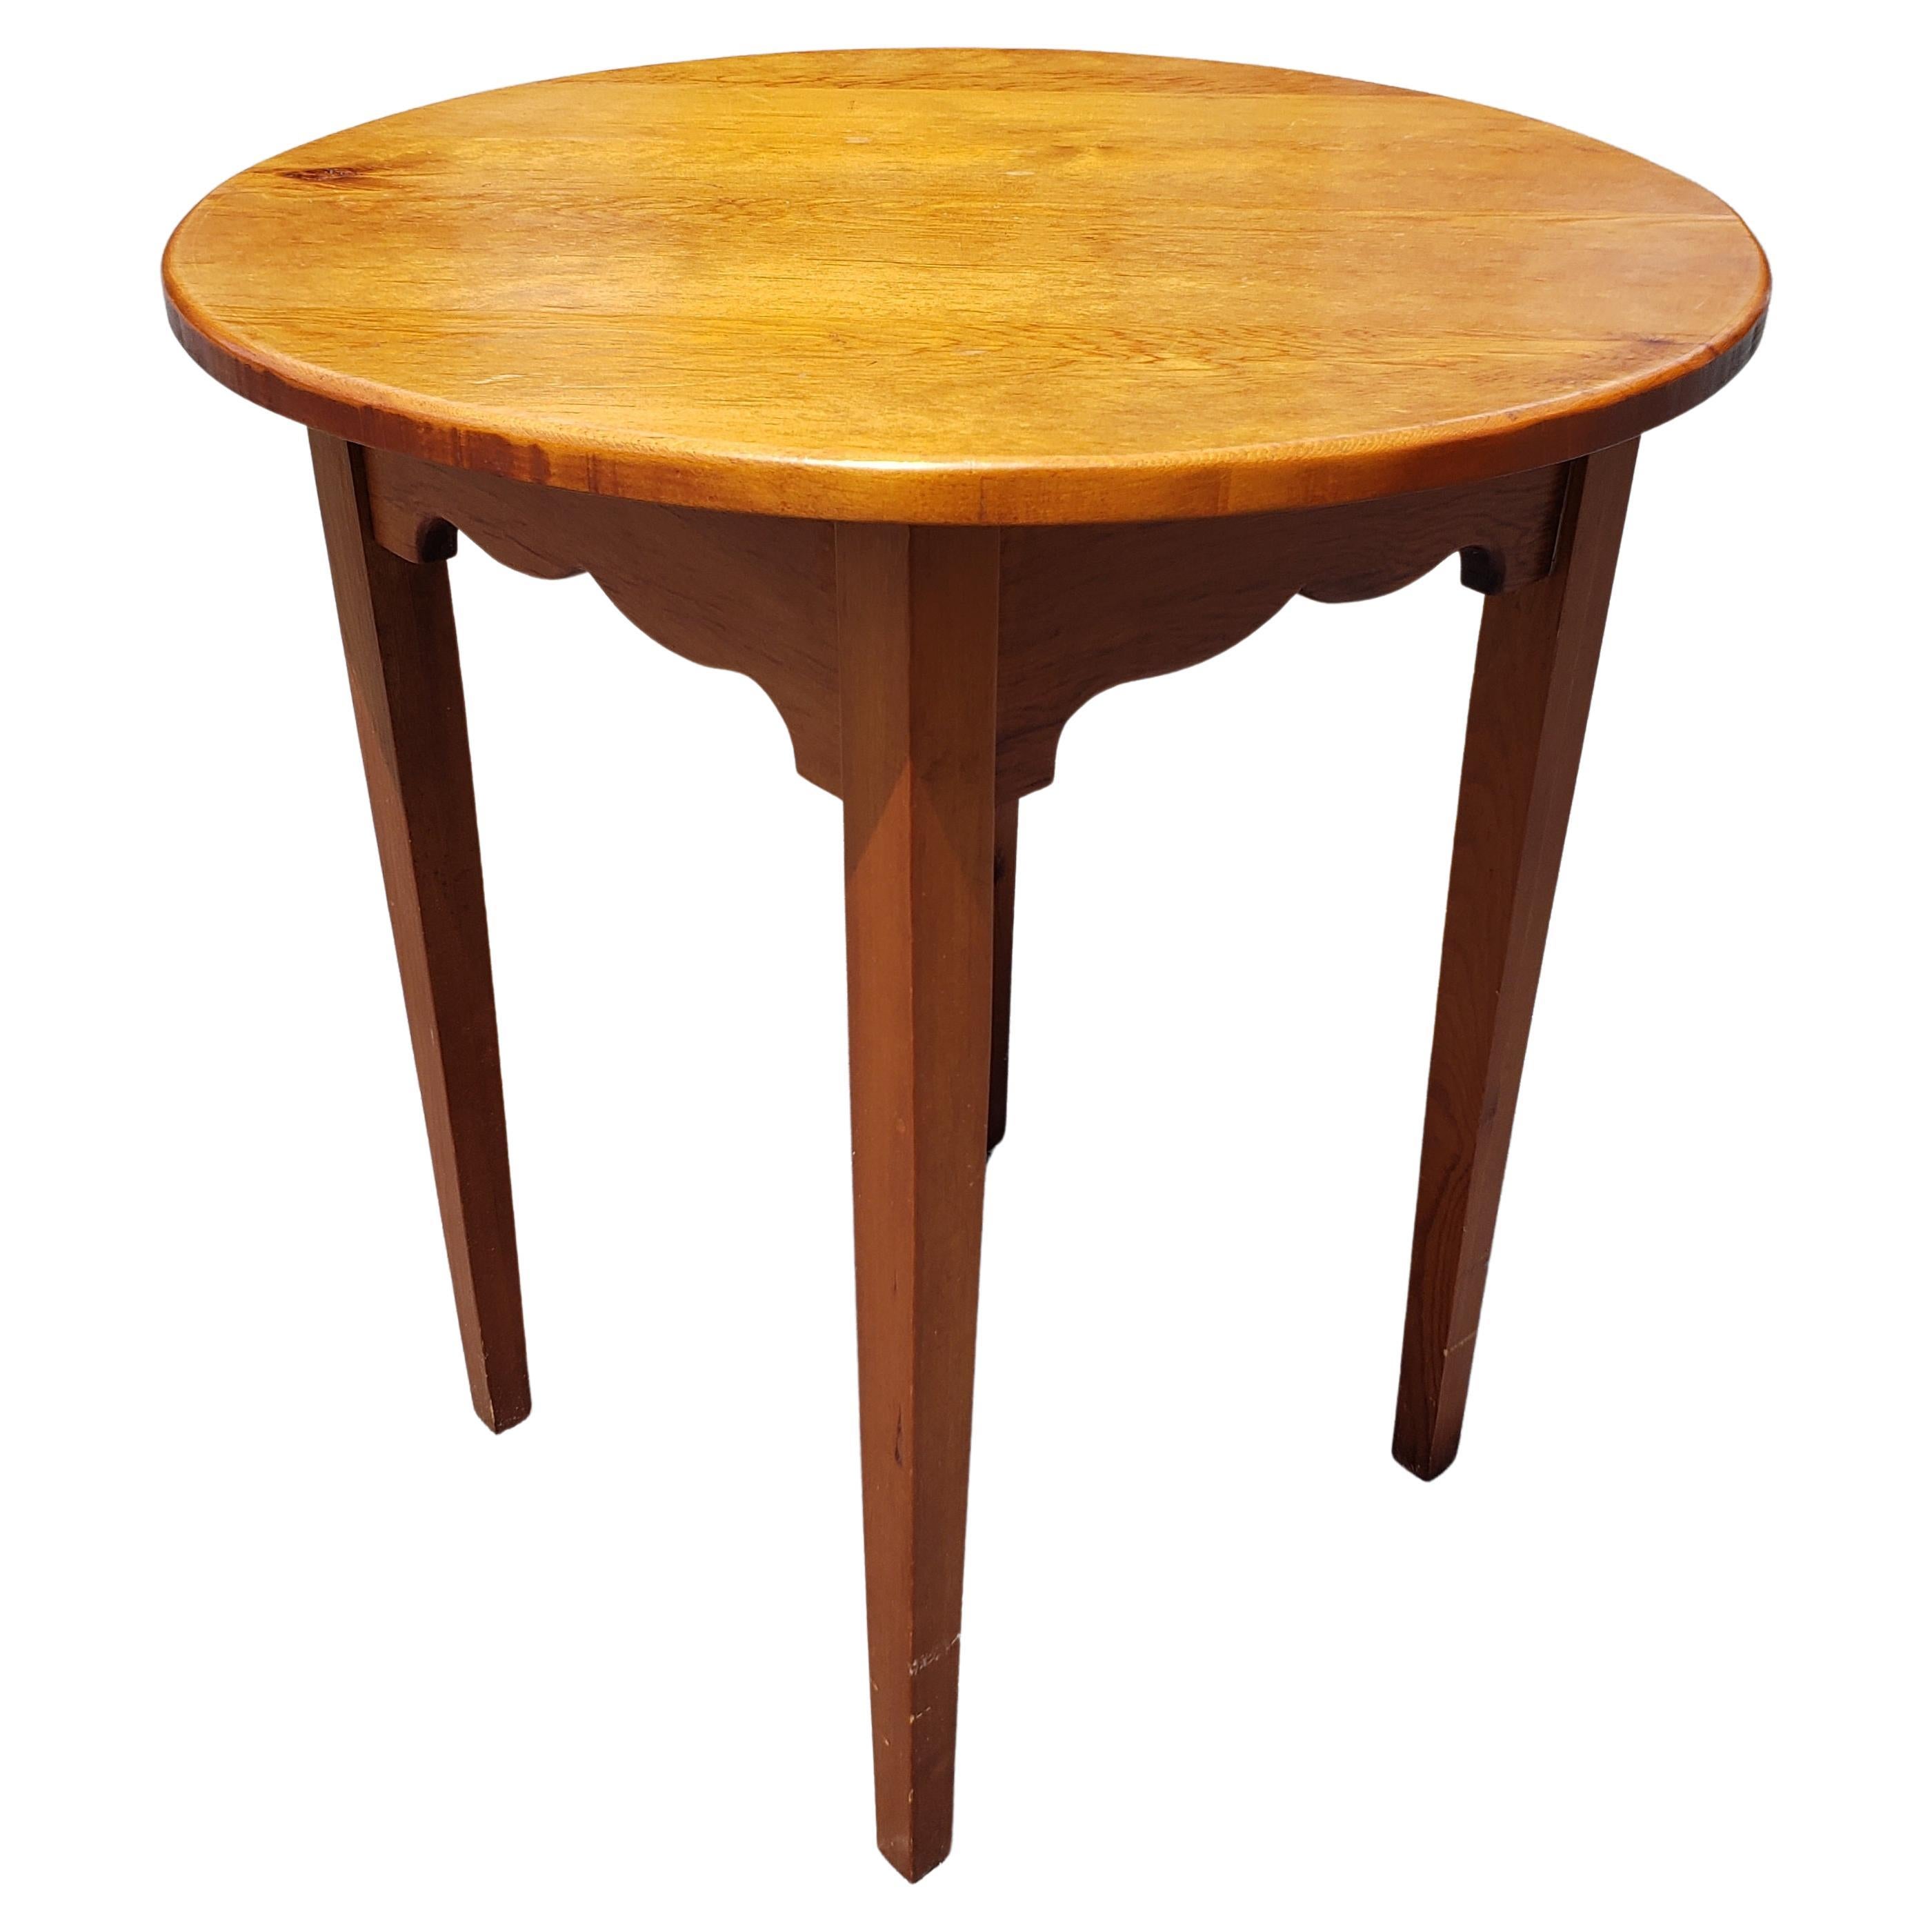 A beautifully hand-crafted solid pine lamp table made by the Amish Artisans of Lancaster County in Eastern Pennsylvania. Table measures 25